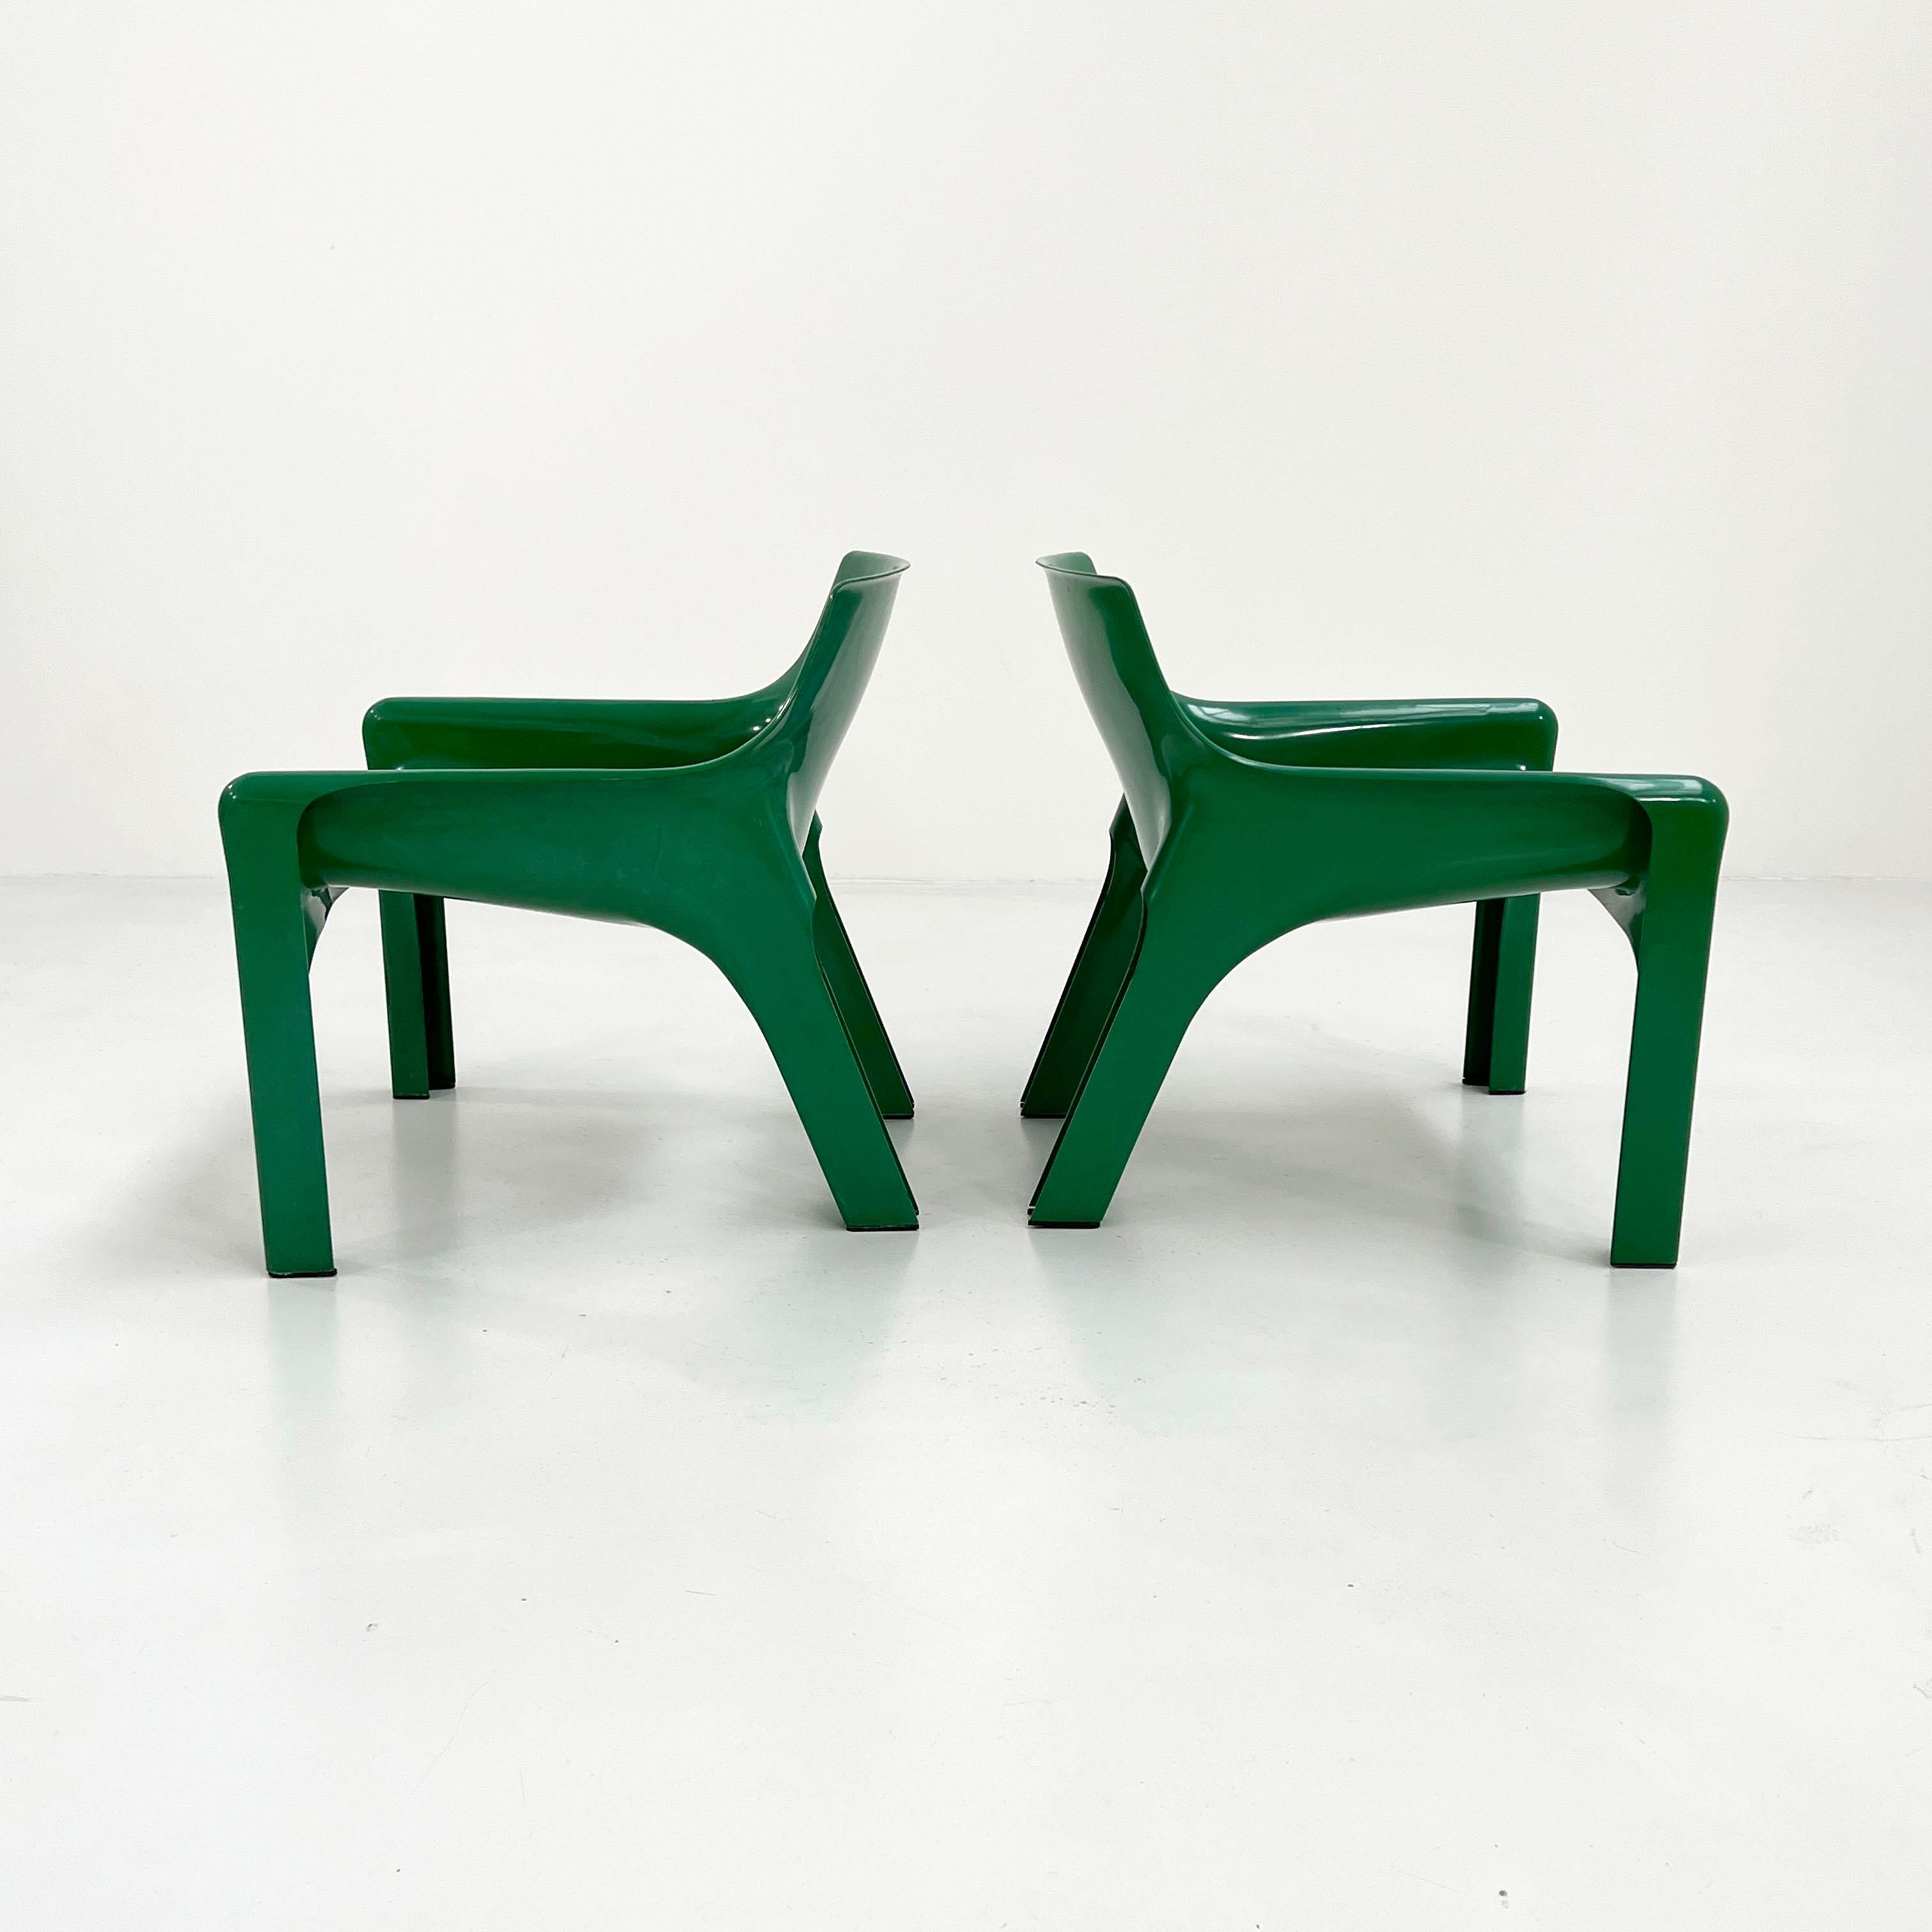 Late 20th Century Pair of Green Vicario Lounge Chair by Vico Magistretti for Artemide, 1970s